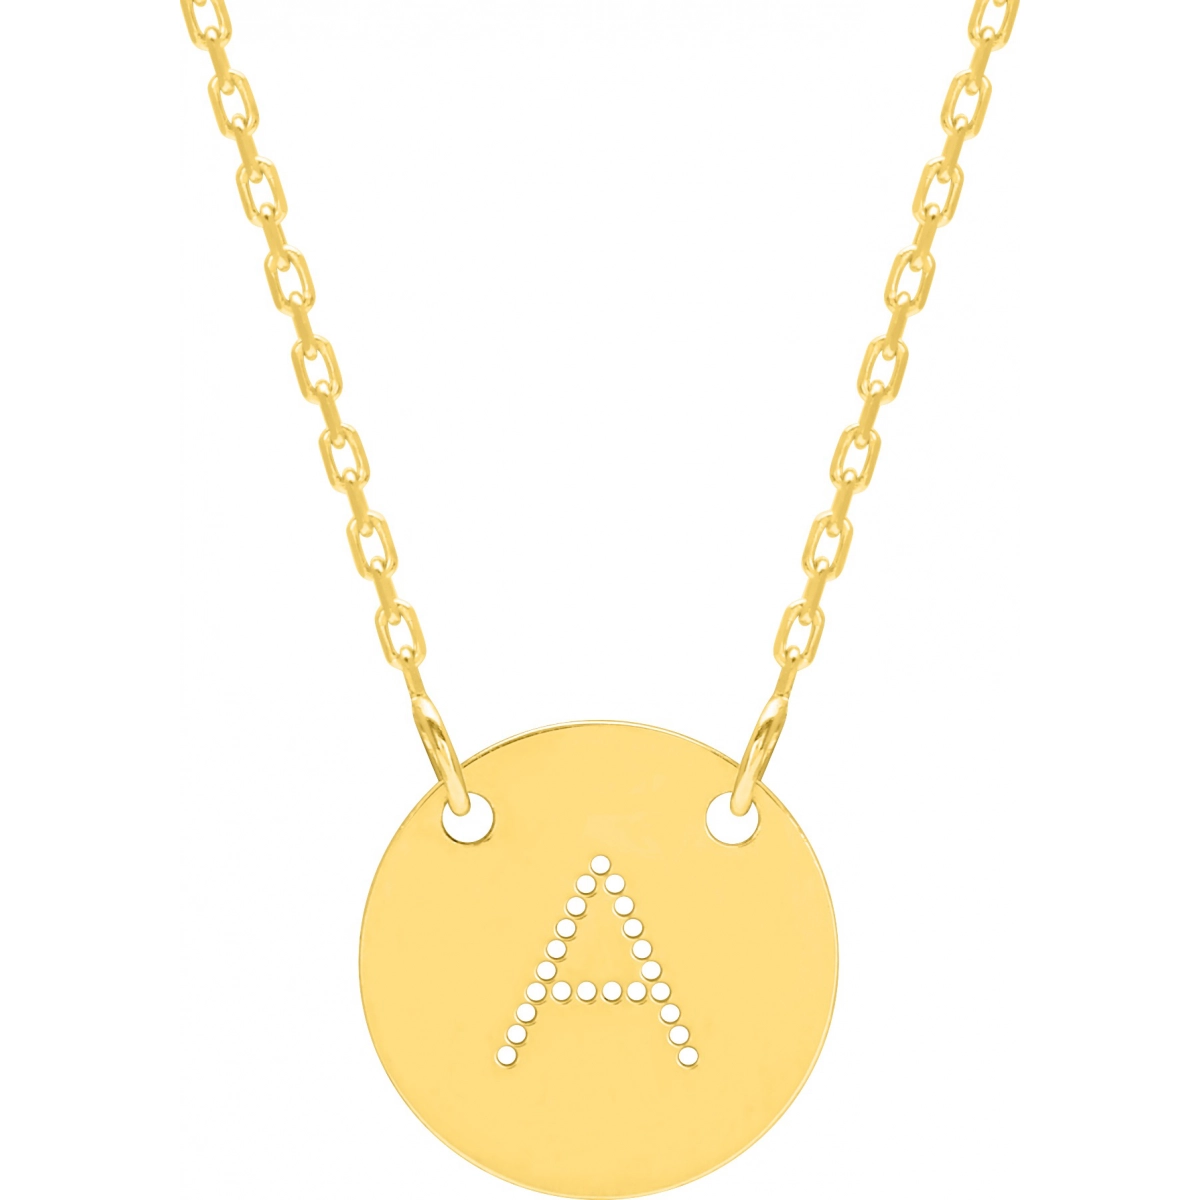 Necklace Gold plated brass  Lua Blanca  132327.0